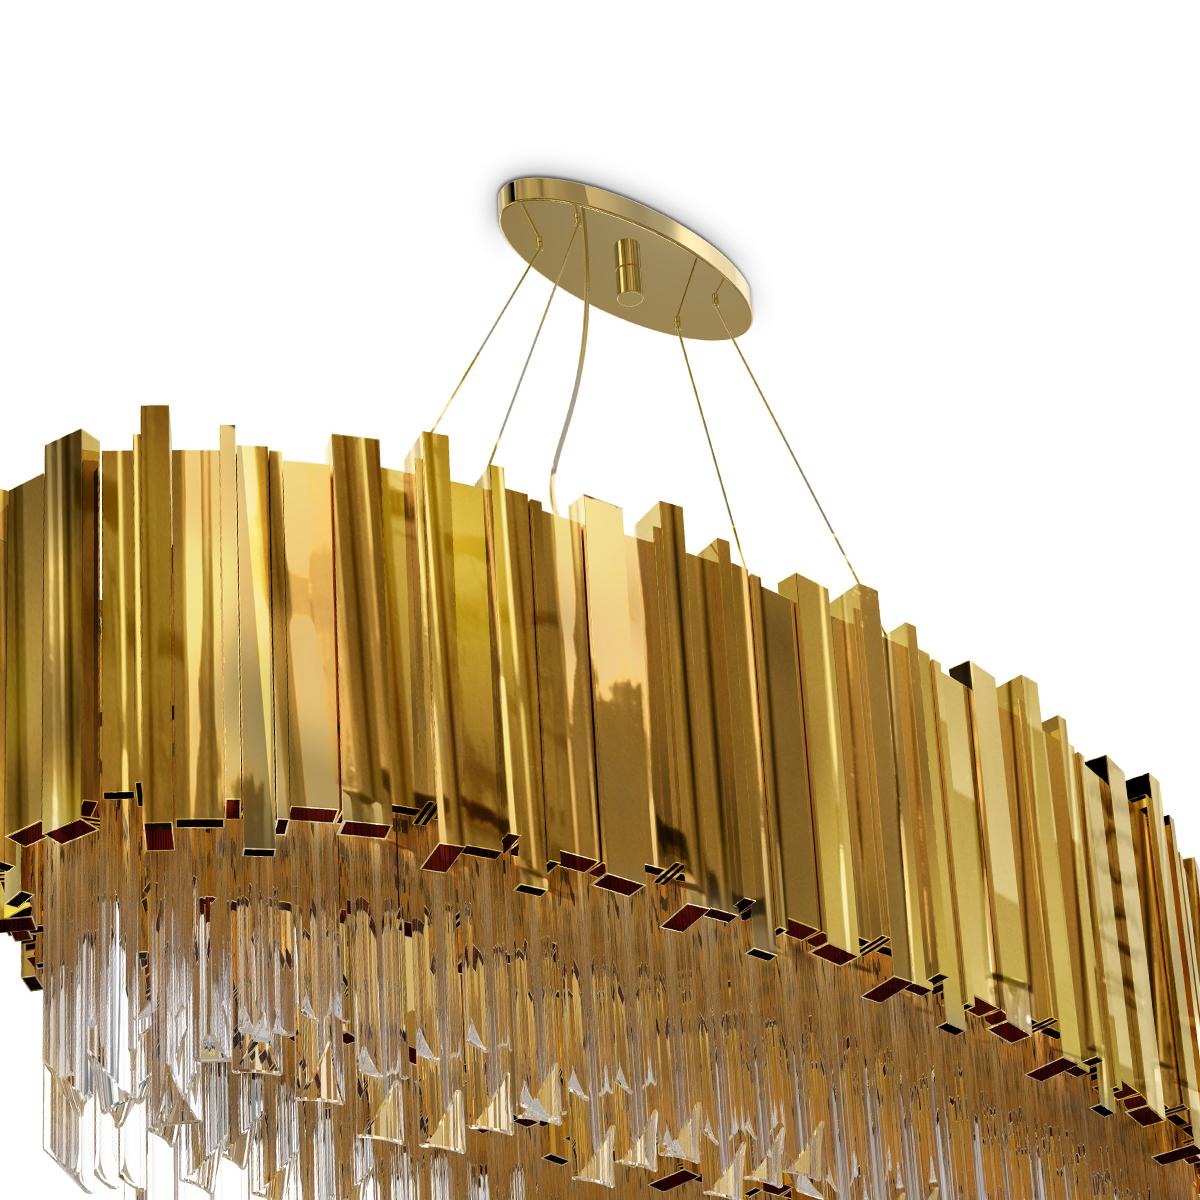 Chandelier Ambassador oval with crystal glass pendants.
With a big ring of gold plated polished brass
rectangular sticks. With 24 bulbs, lamp holder type G9.
20 Watt max, for 220-240V. Bulbs not included.
With steel ropes for hanging: 200cm